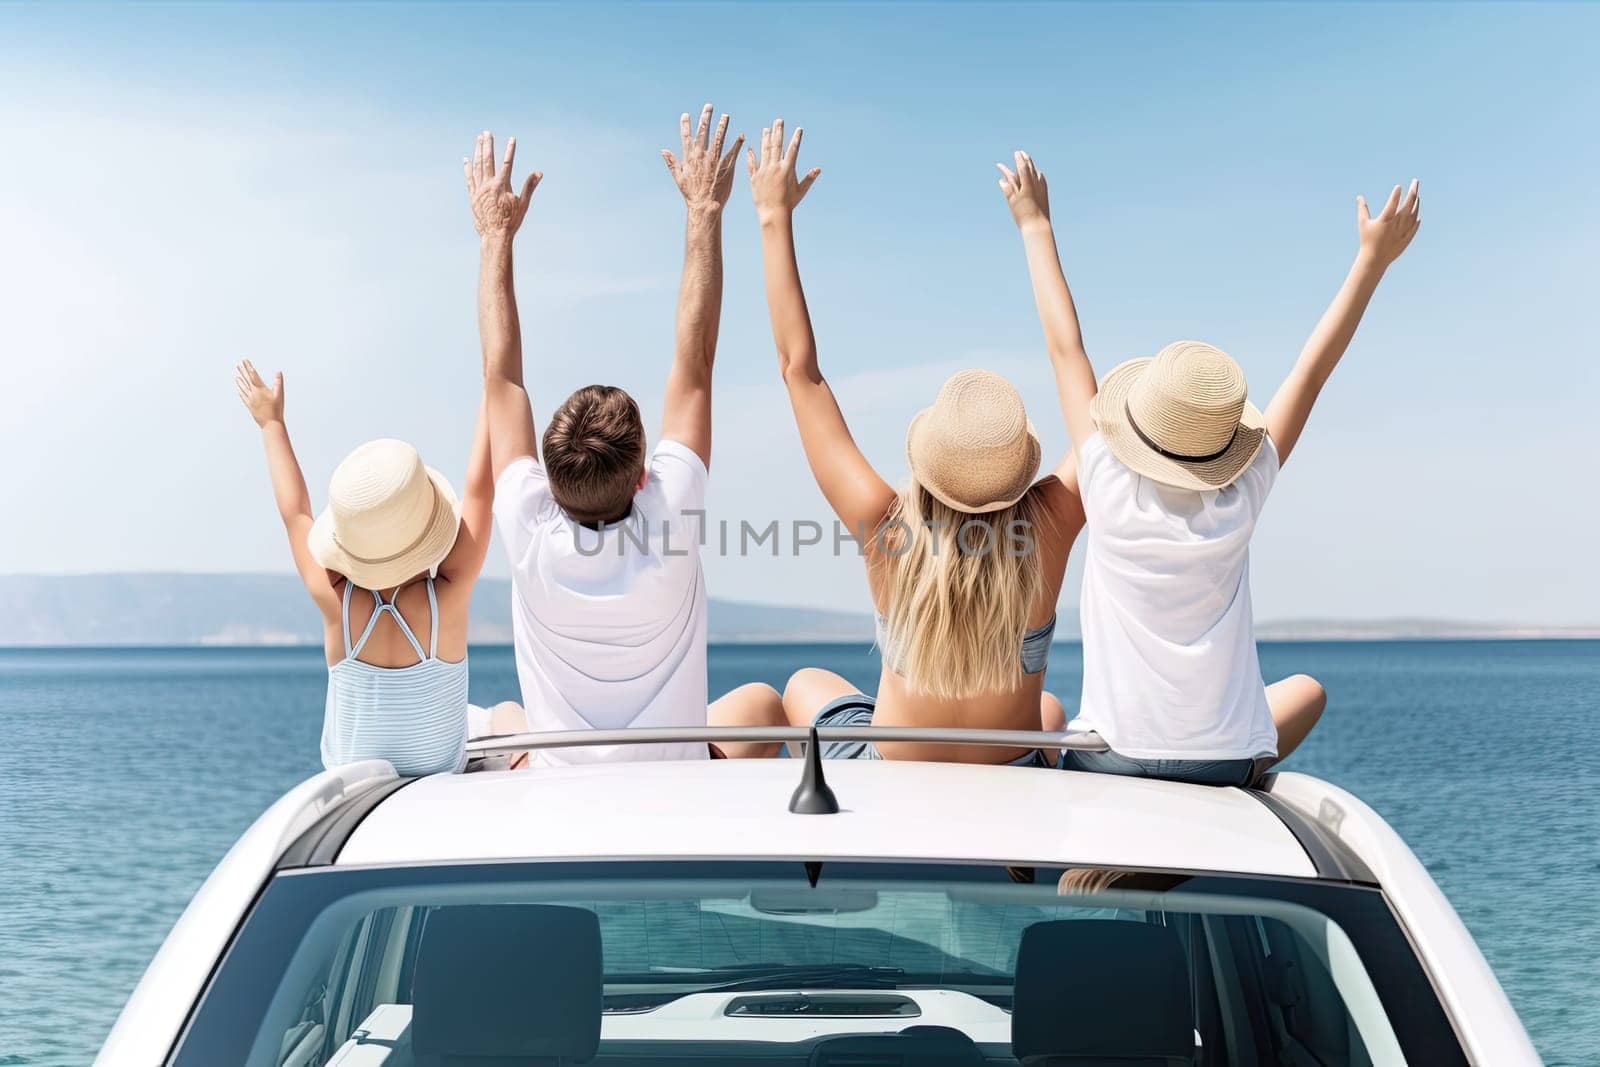 Family summer vacation. Summer holidays and car travel concept